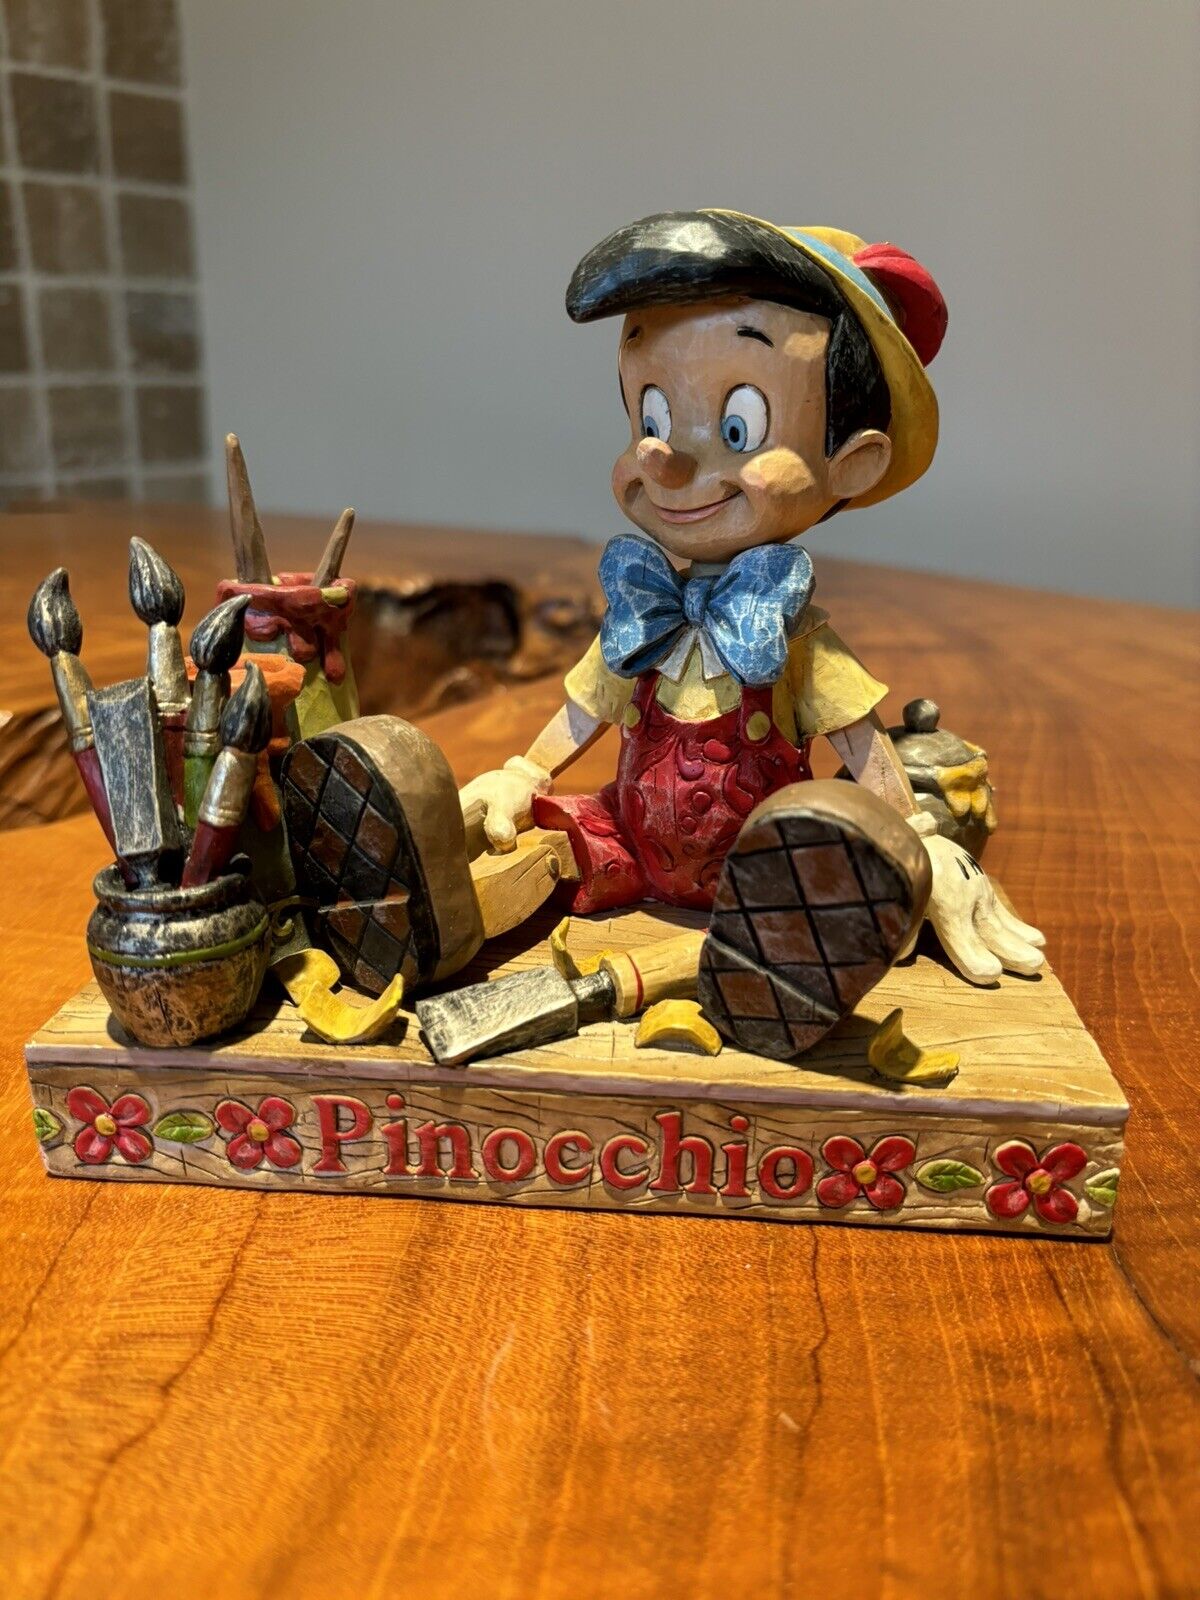 Walt Disney Showcase Collection “Carved From the Heart” Pinocchio Jim Shore